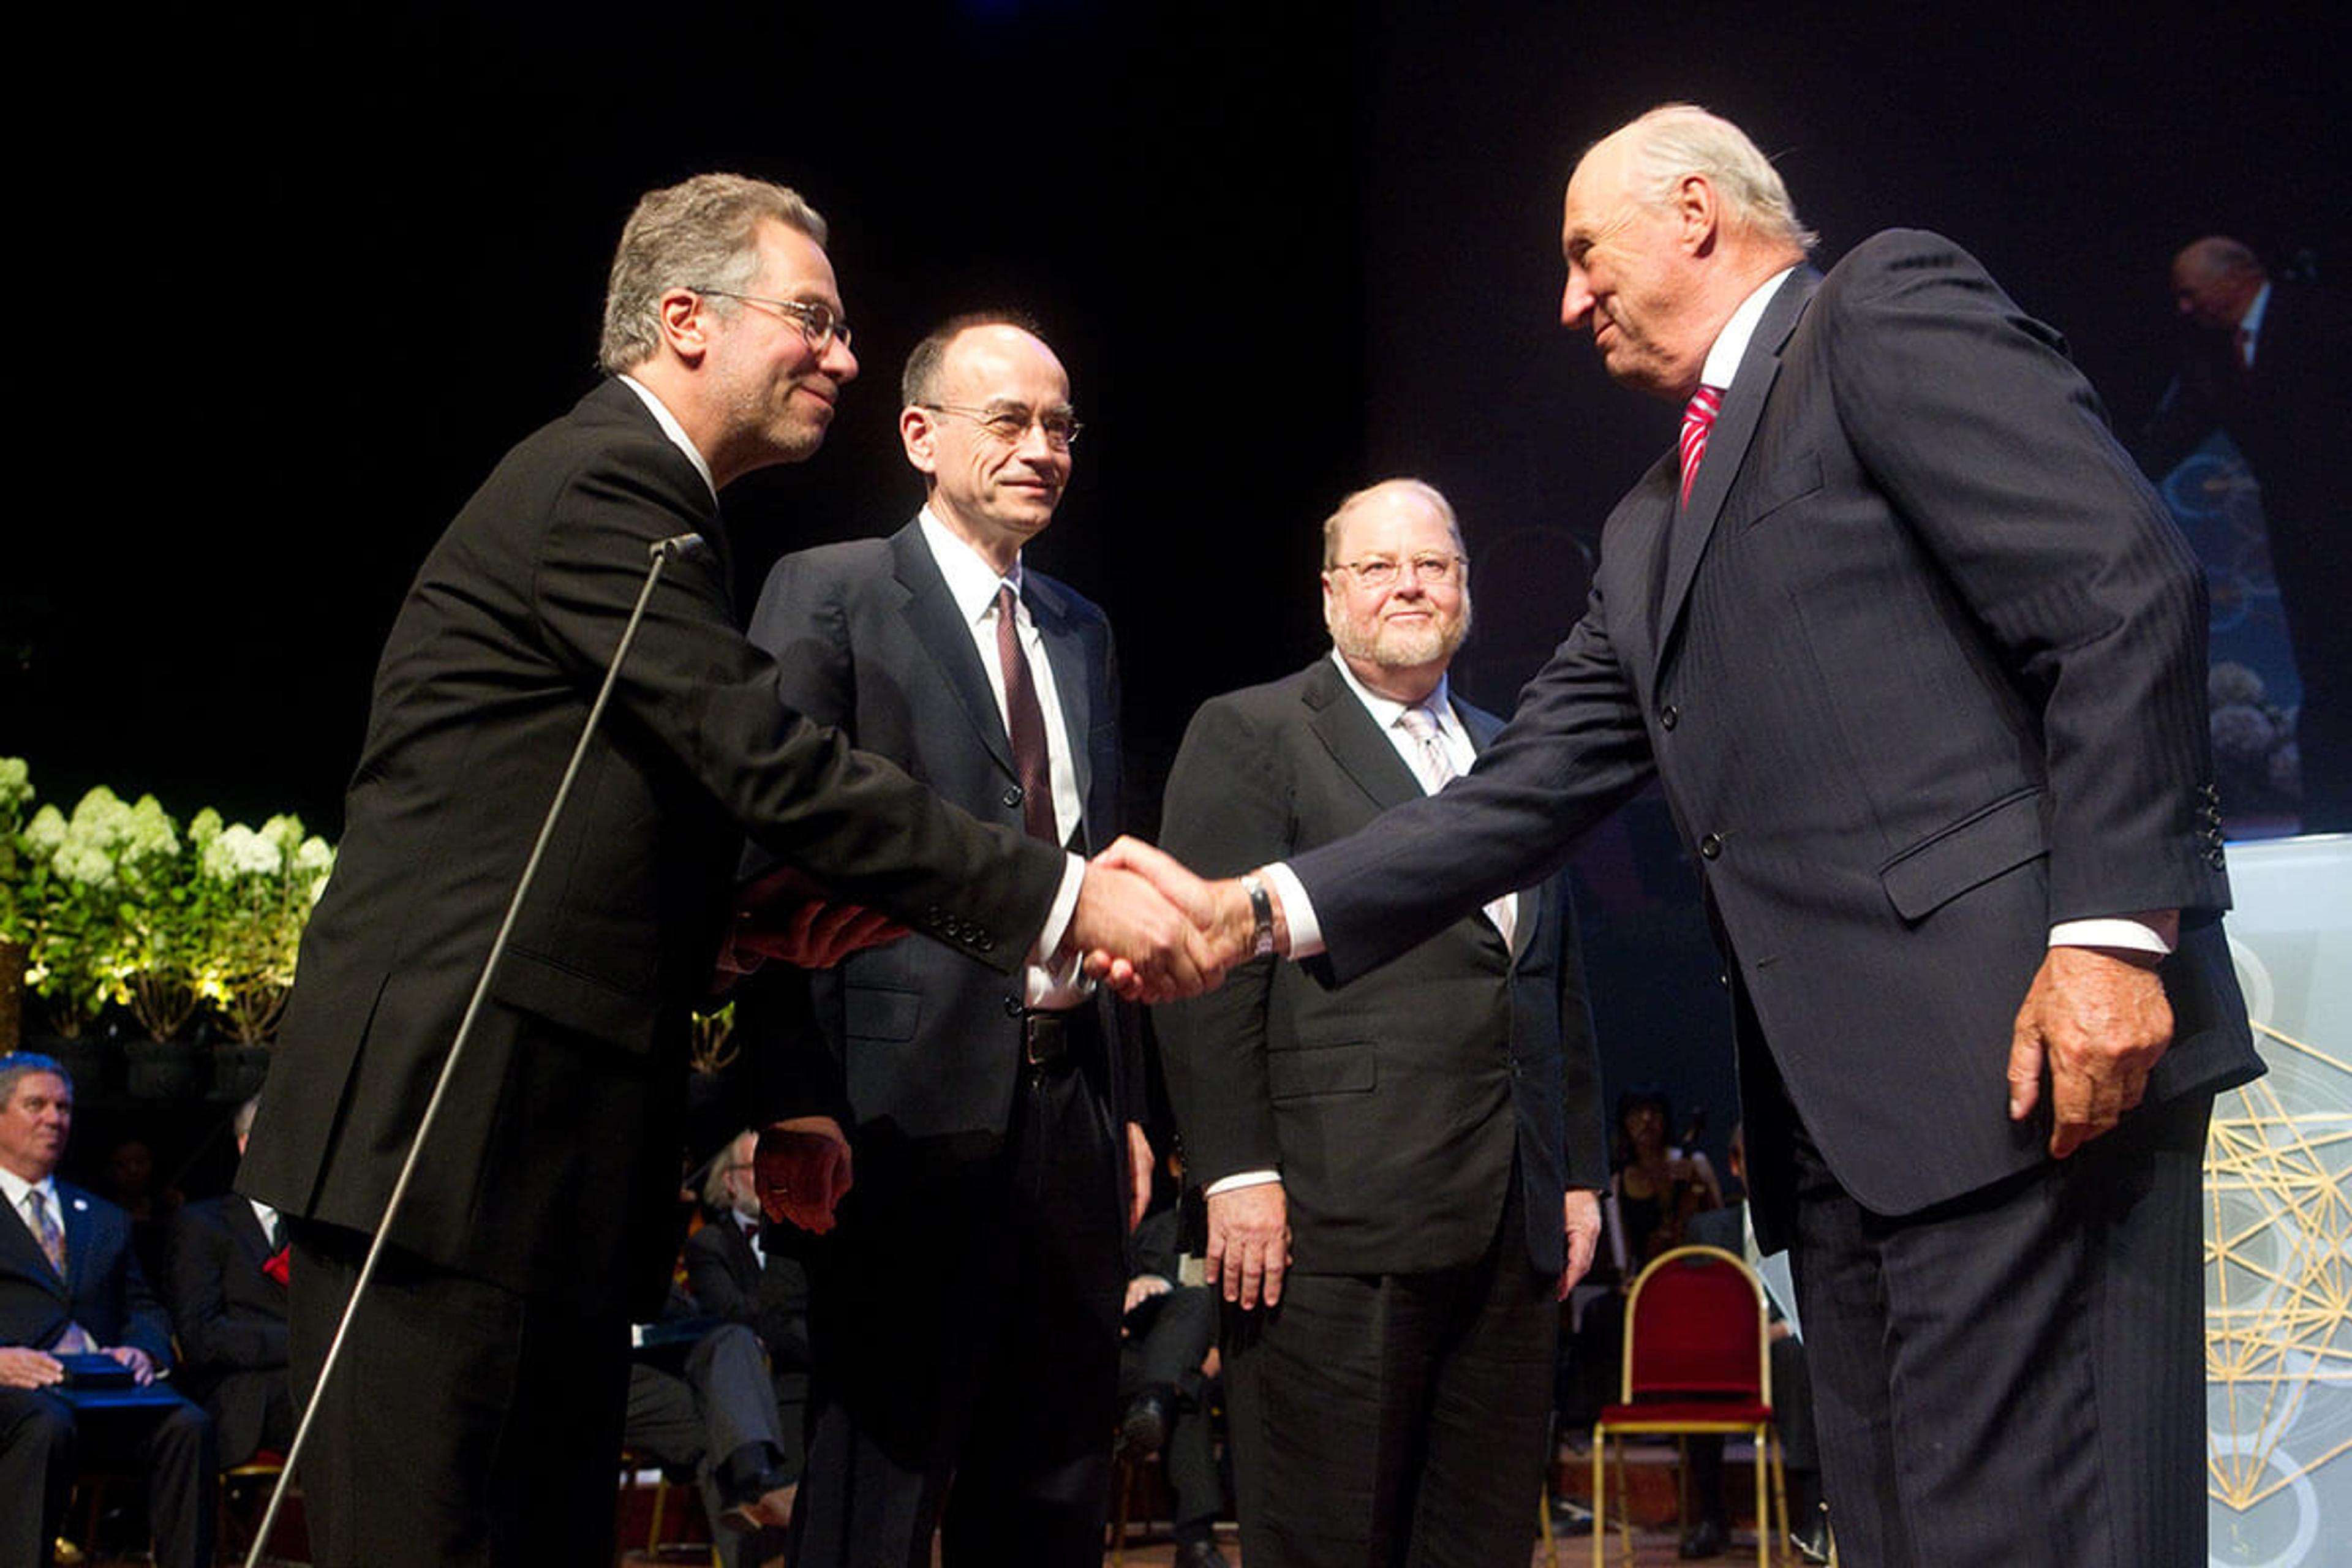 His Majesty King Harald of Norway presents the Kavli Prize in Neuroscience. Left to right: Richard Scheller, Thomas Südhof, James Rothman, HRH King Harald